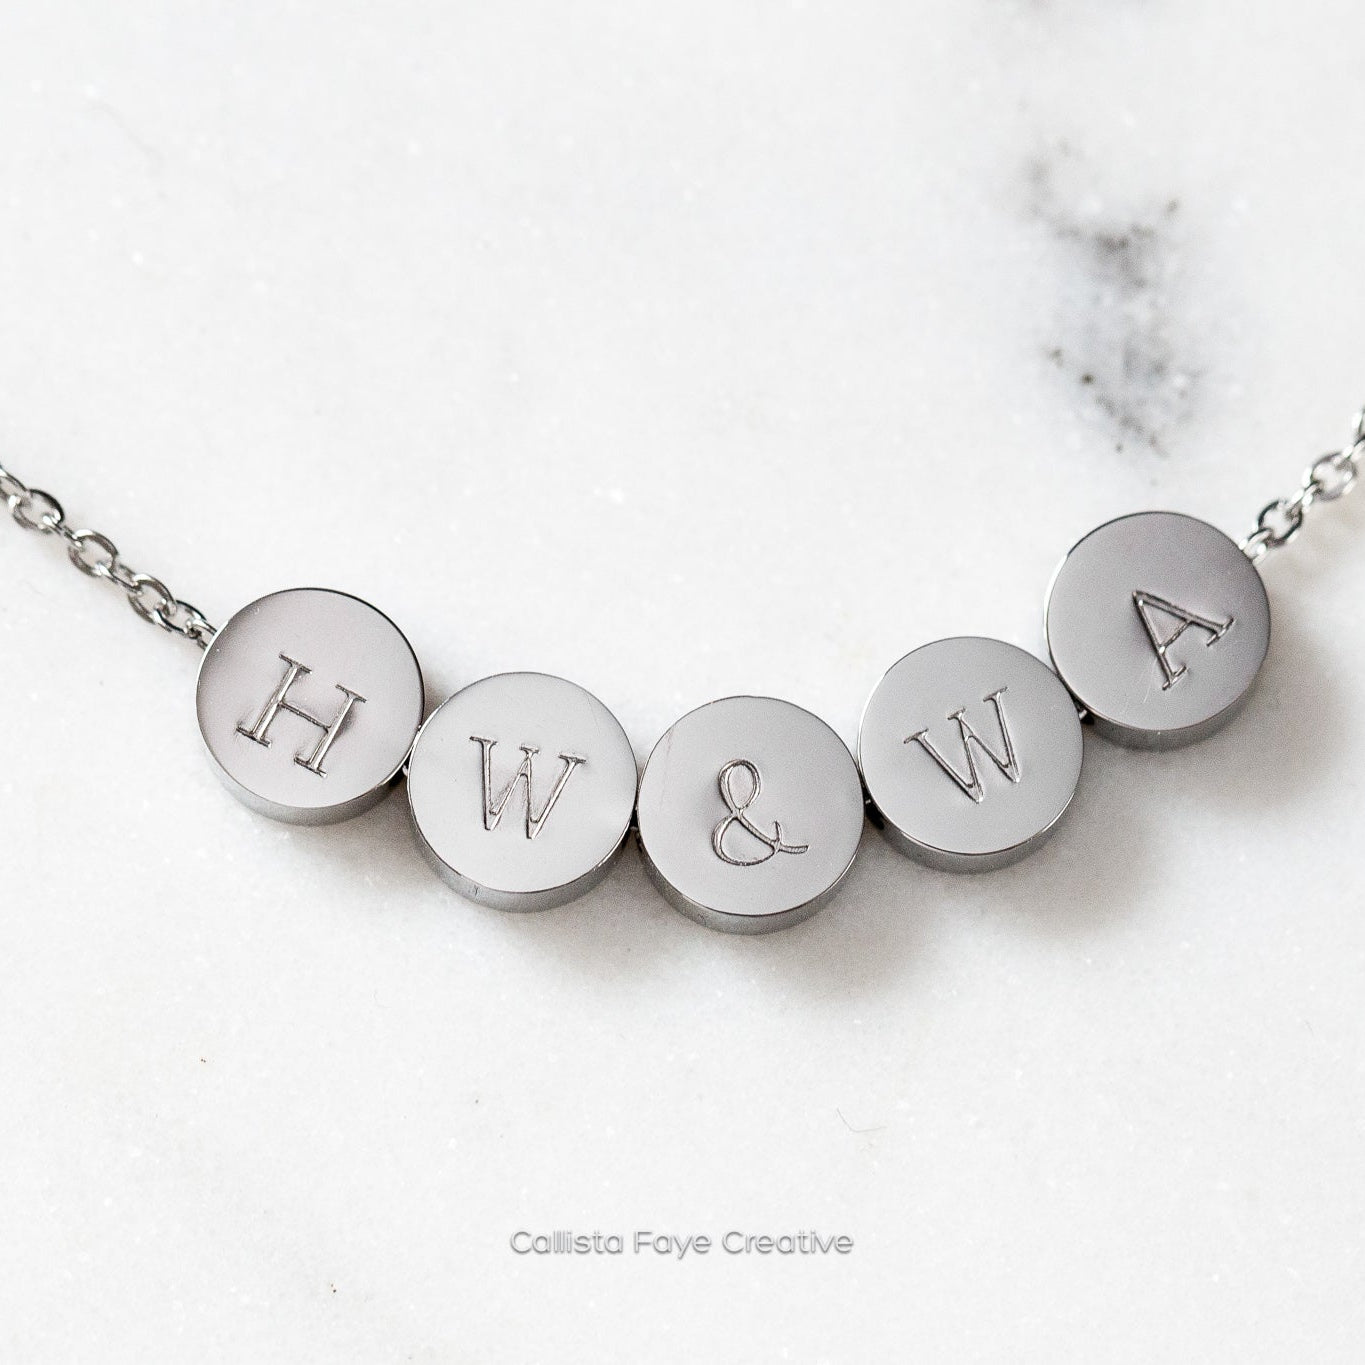 Custom Initial, Birth Flower Mini Coin Bead Necklace, Personalized Necklaces callistafaye 5 Beads Silver 